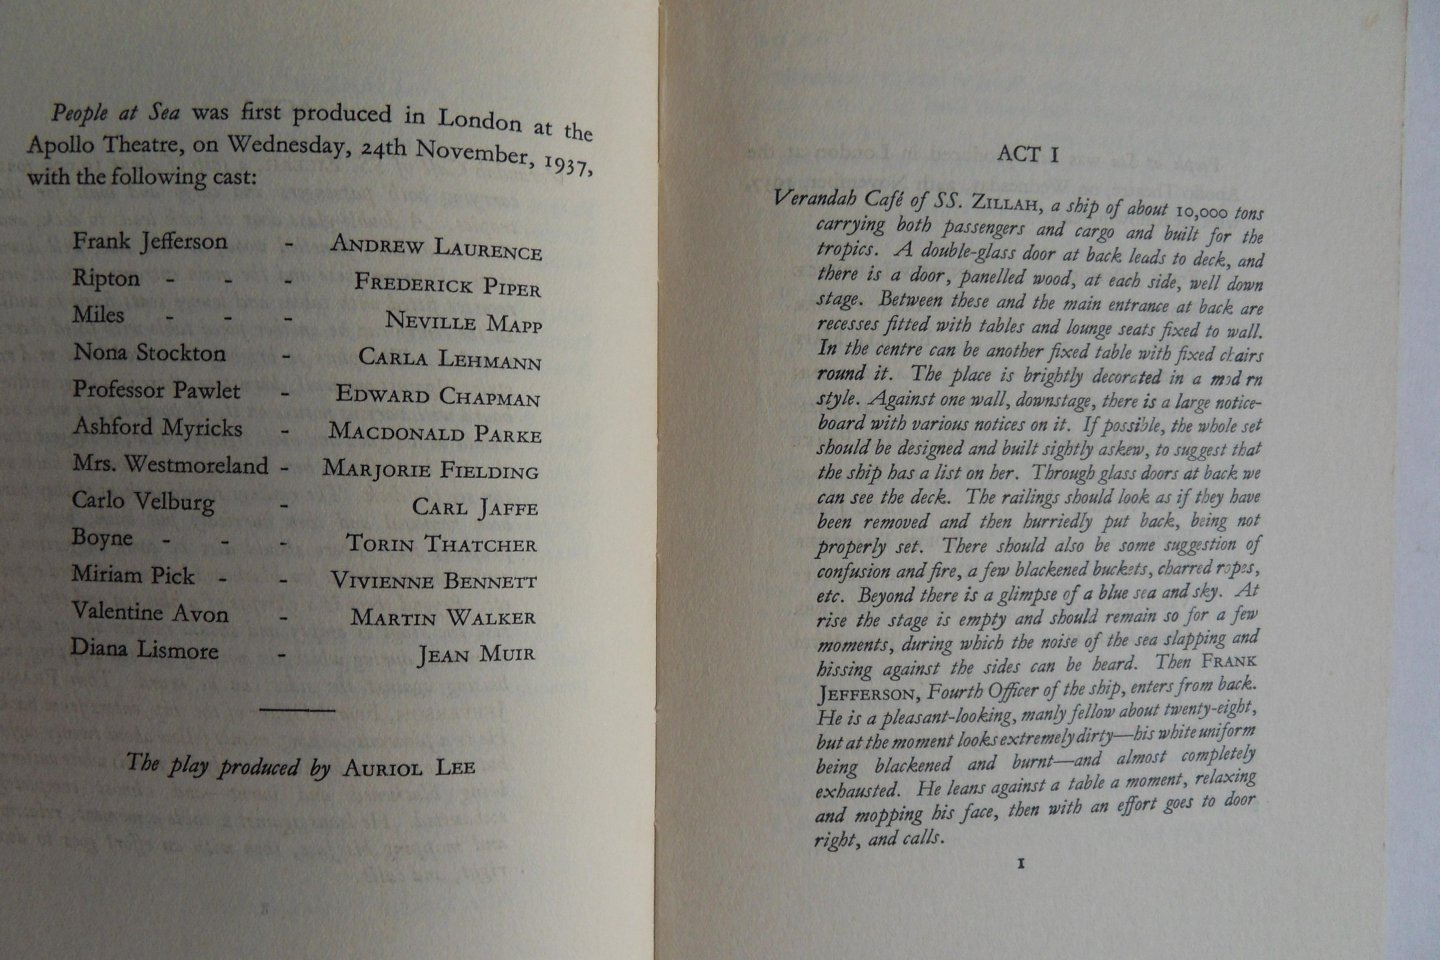 Priestley, J.B. - People at Sea. - A Play in Three Acts. [ Proof Copy ].